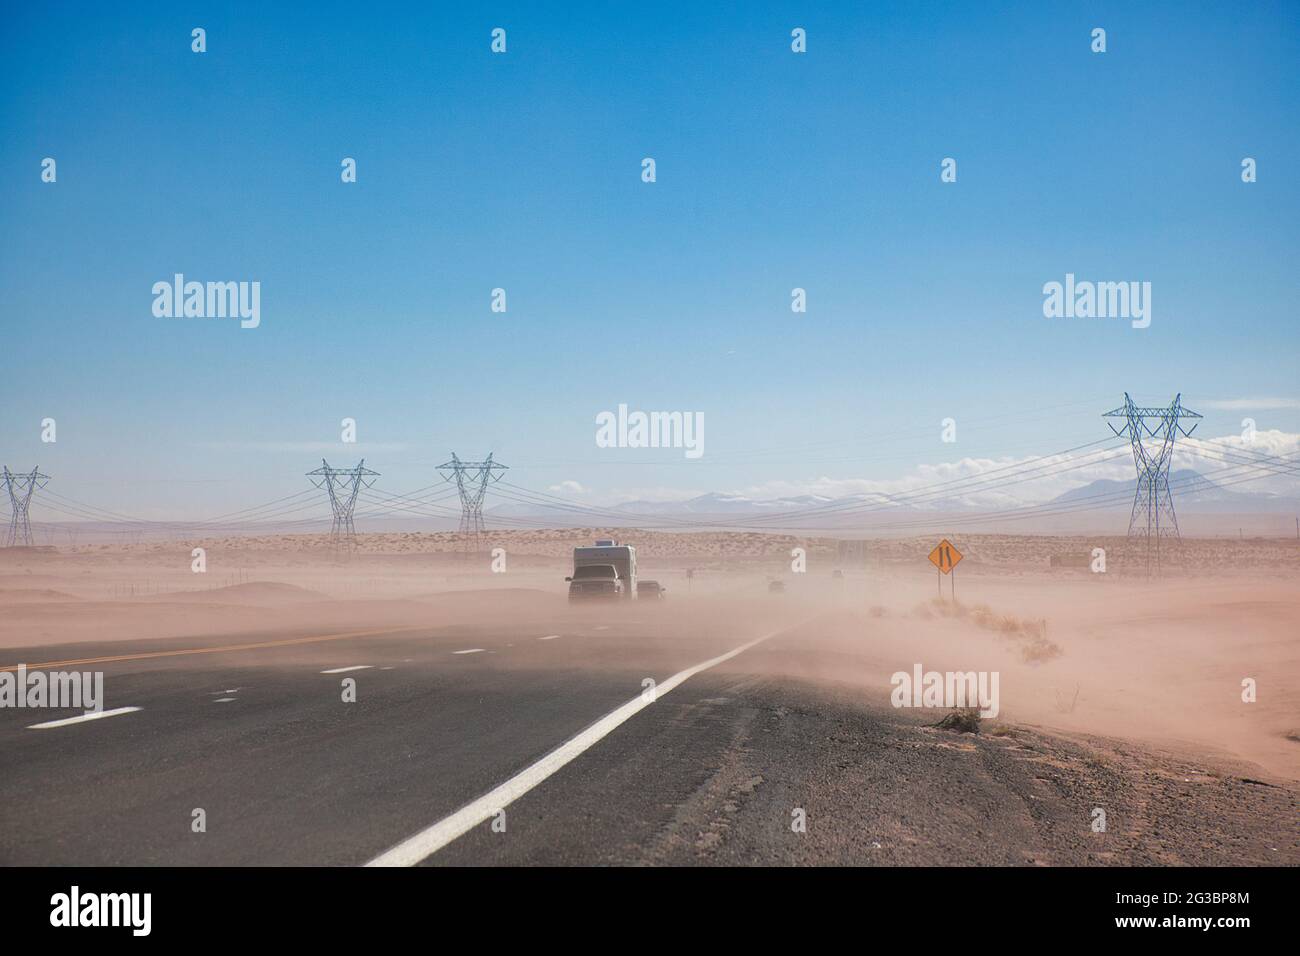 Electricity pylons crossing a road in semi desert with a layer of dust blowing across the road and two vehicles travelling, in Arizona, the USA Stock Photo